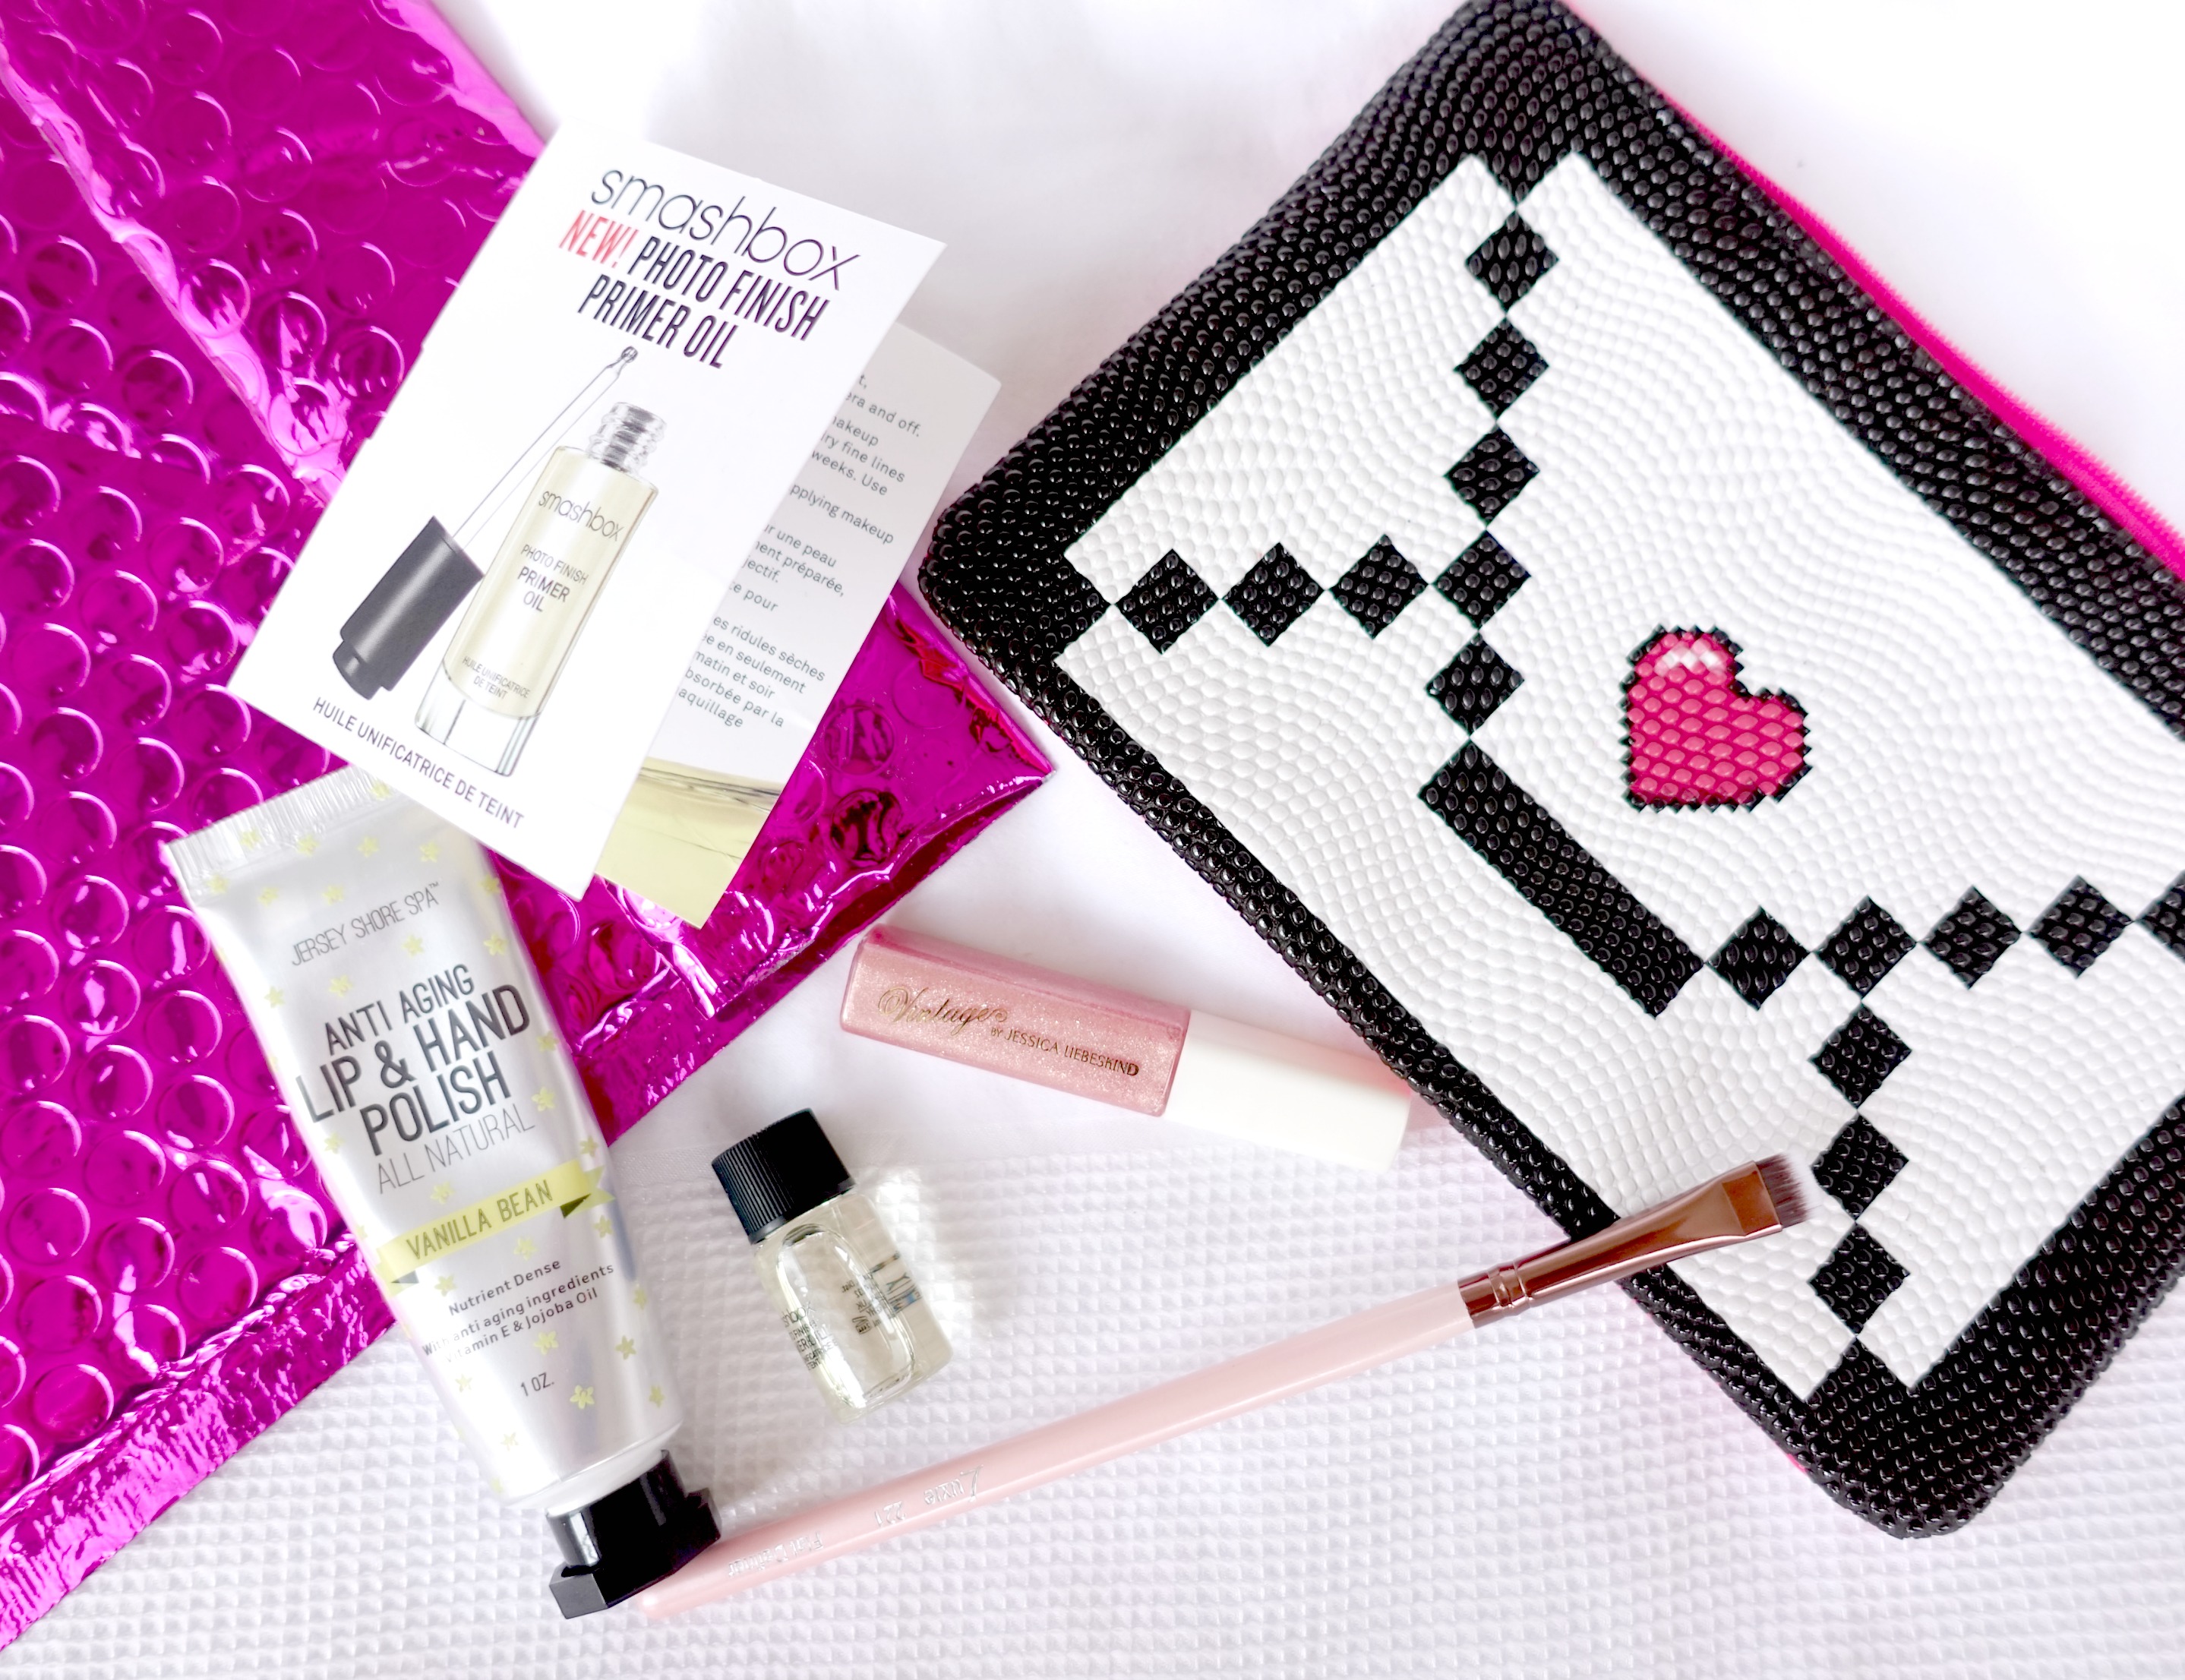 Ipsy Review + Why I'm Canceling My Ipsy Subscription